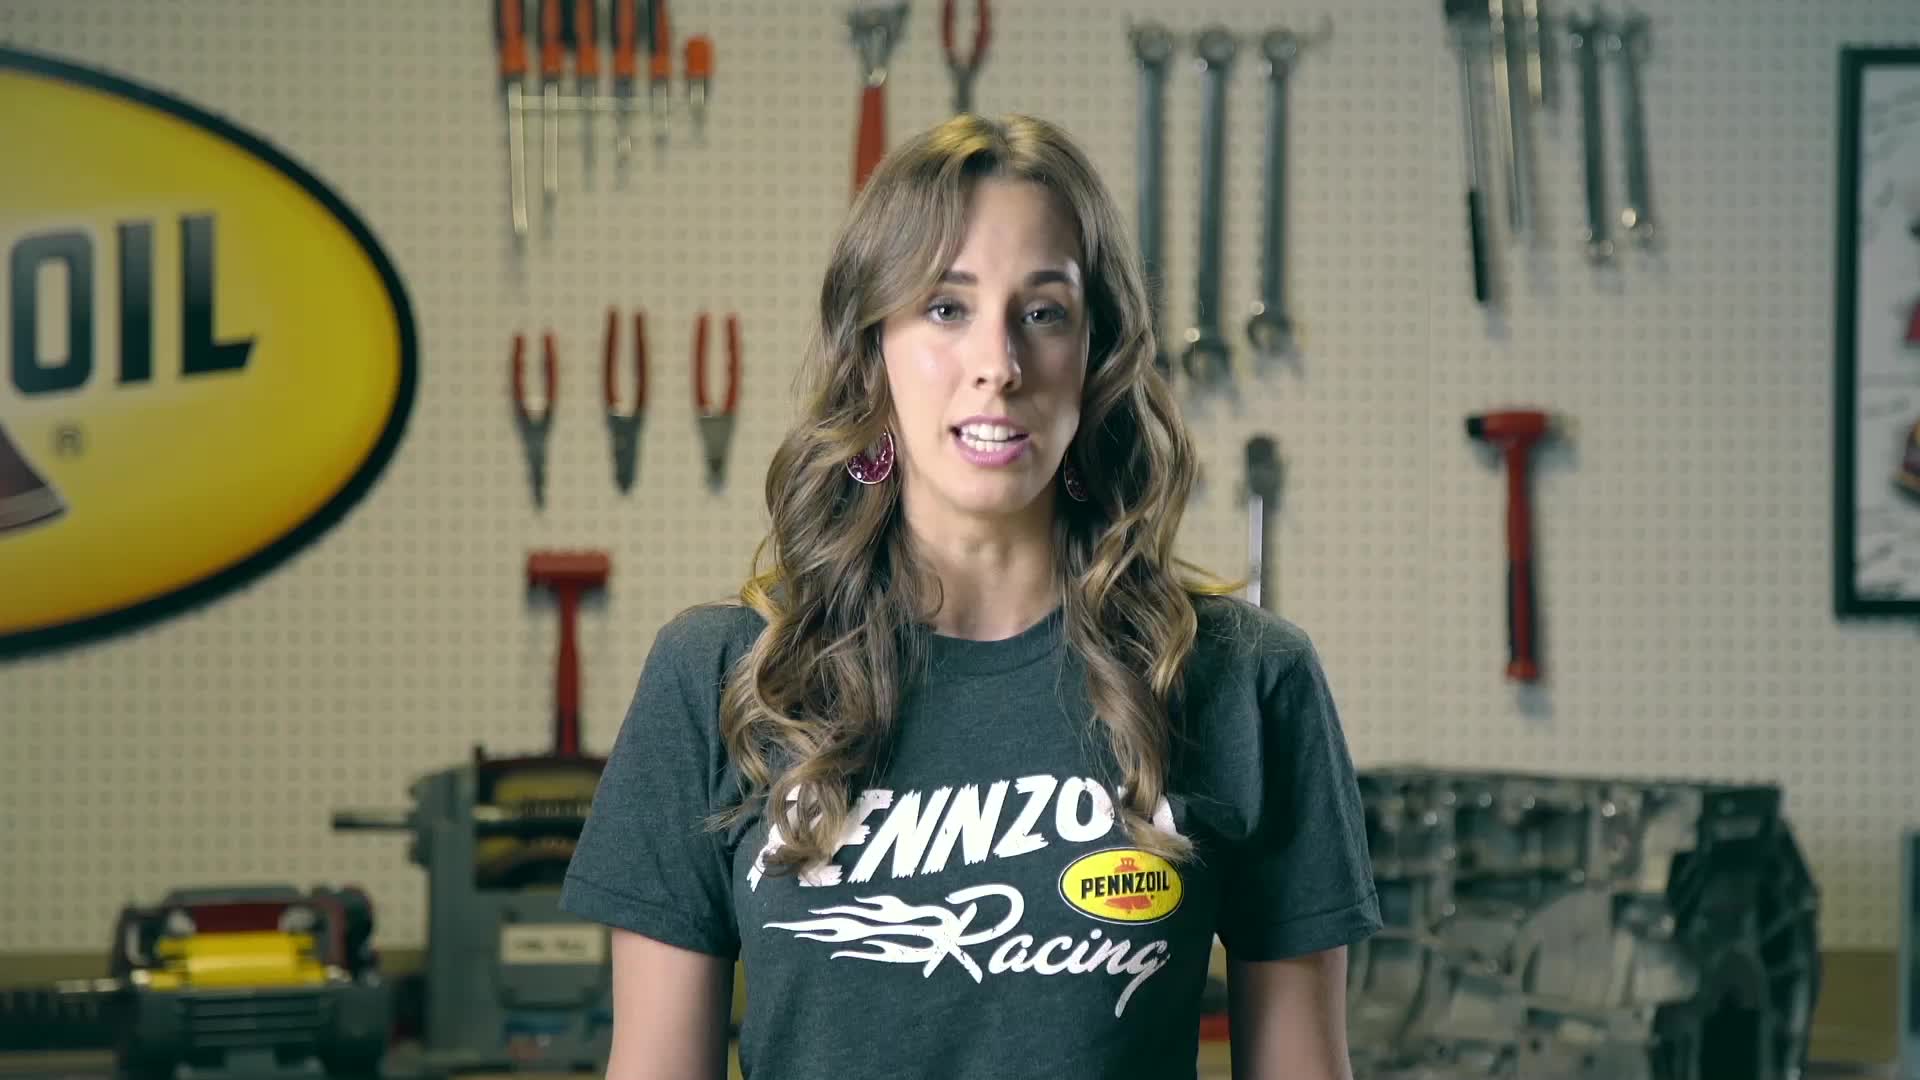 Know Your Oil - Better Fuel Economy Shanna Simmons, a Pennzoil mechanical engineer, explains how synthetic motor oil can improve fuel economy. Make the switch to Pennzoil® Synthetics.